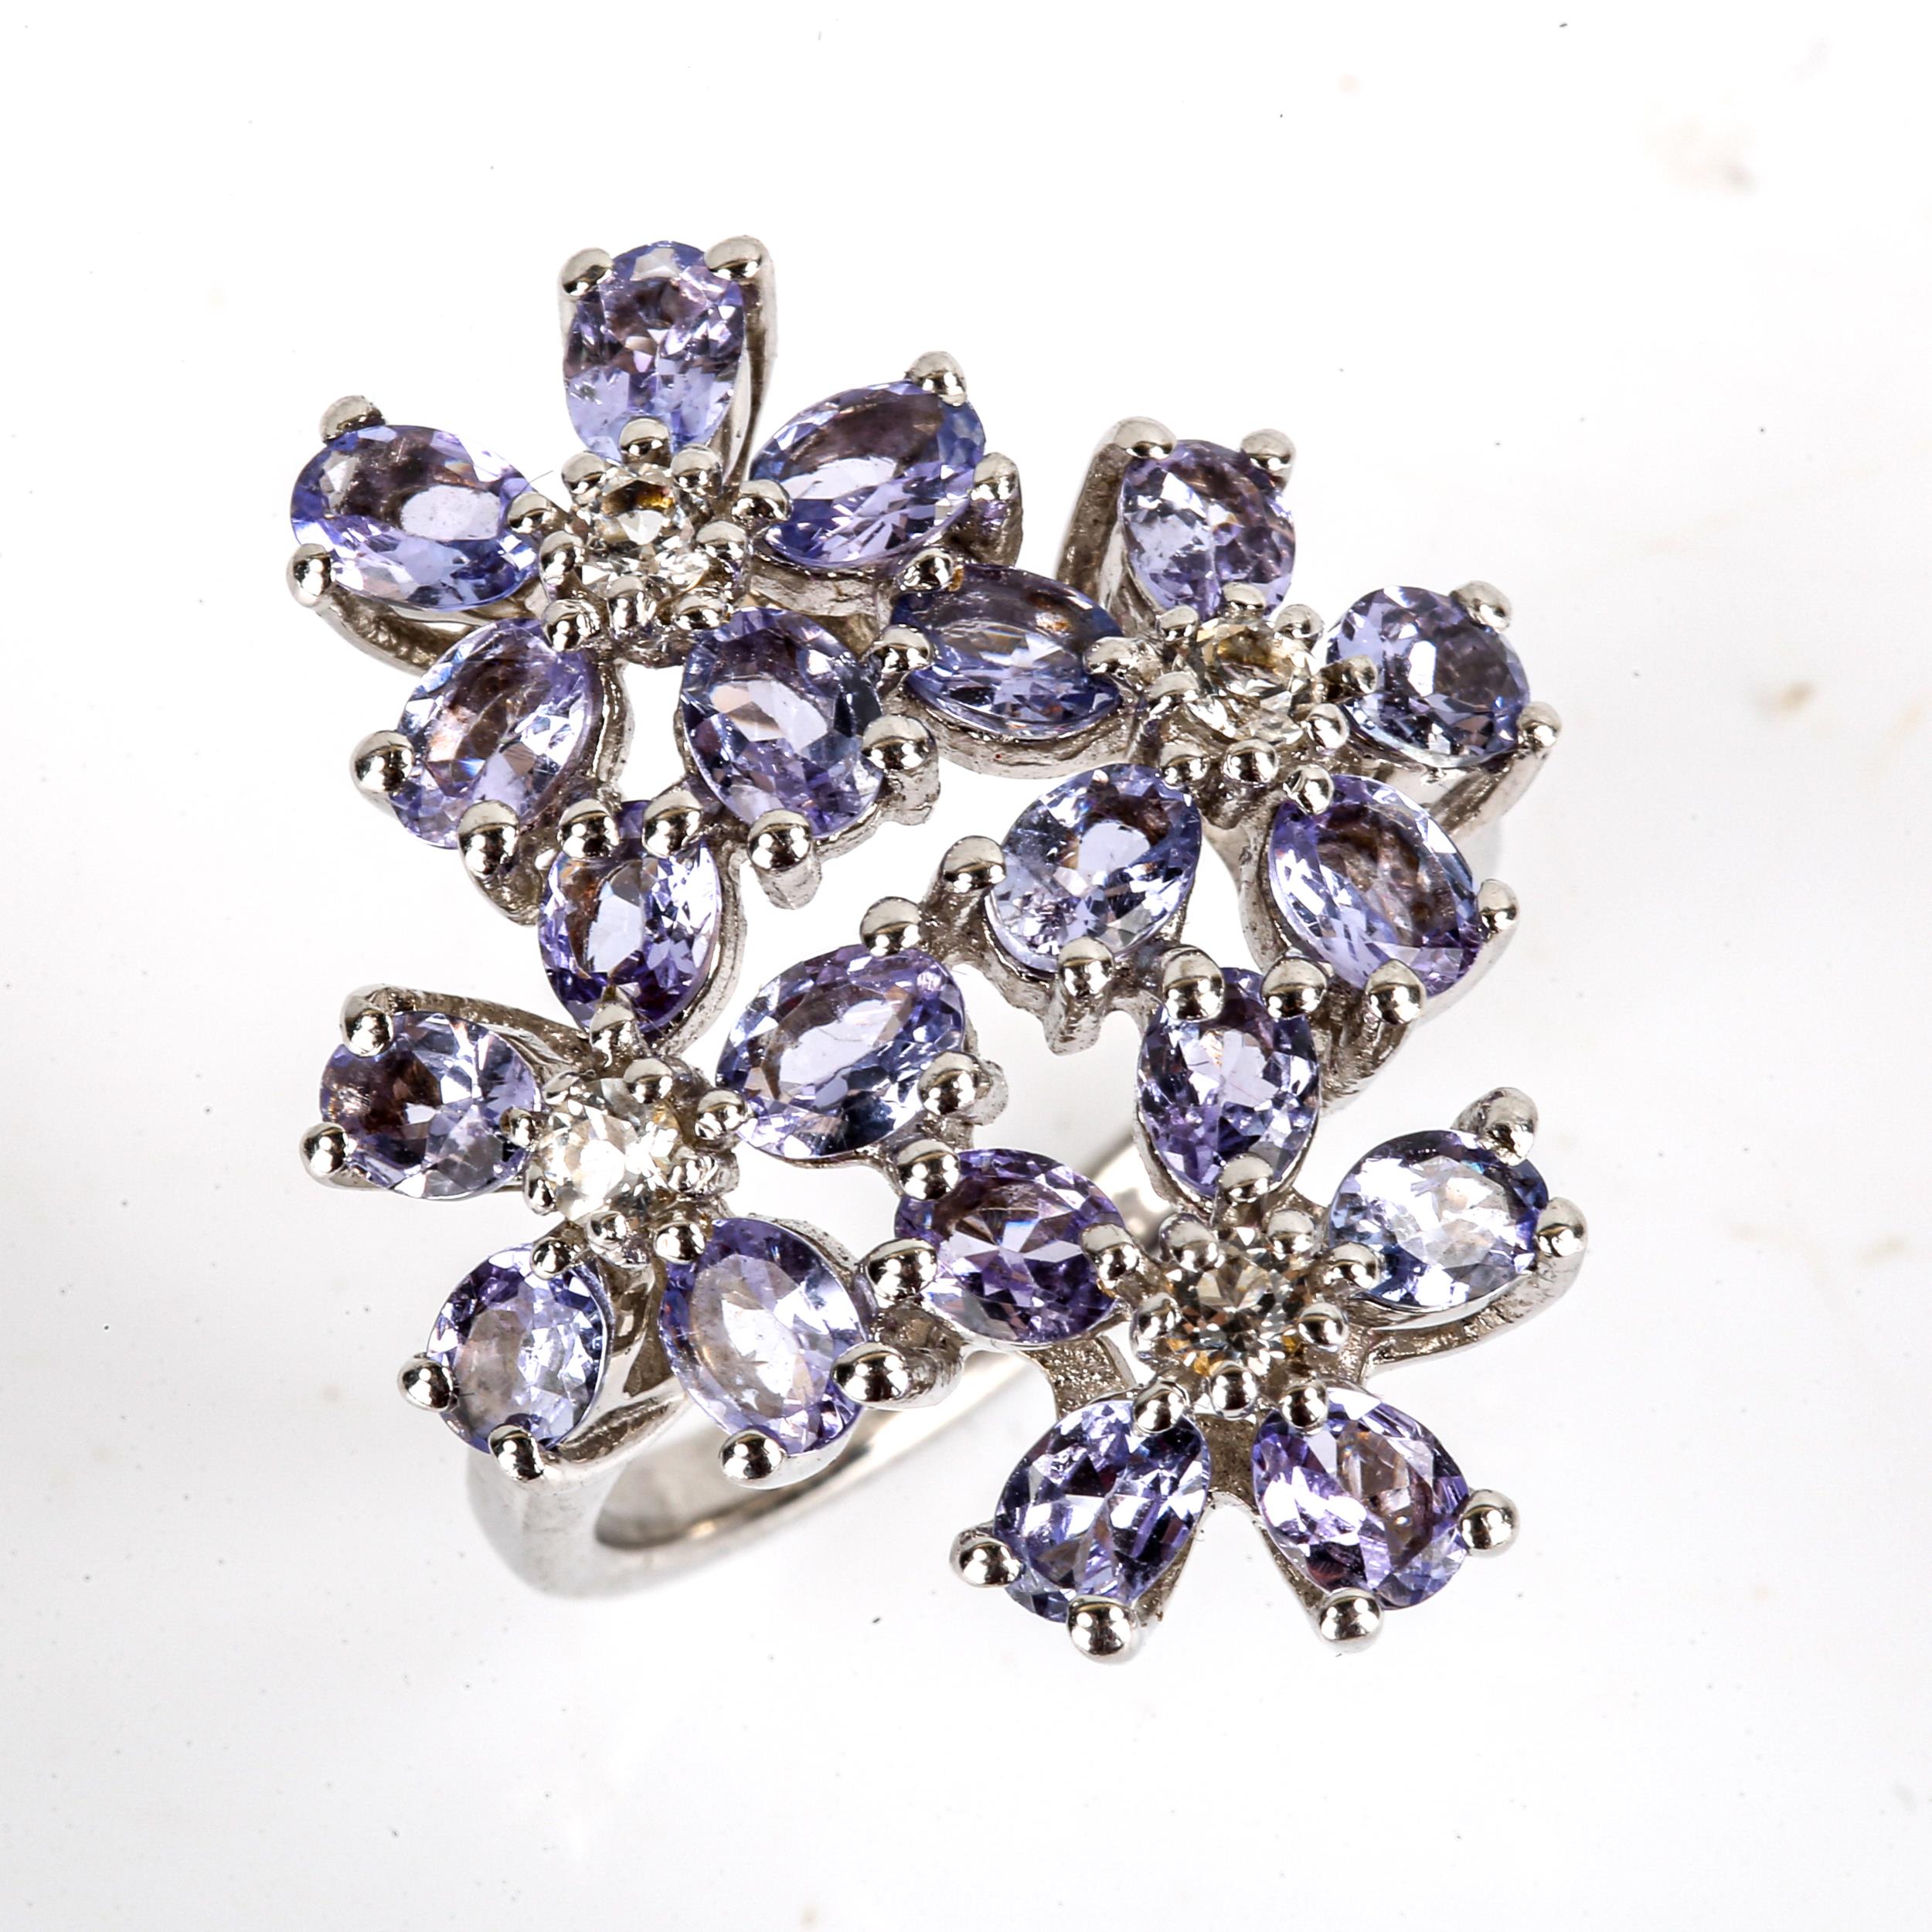 A large modern sterling silver tanzanite and cubic zirconia flowerhead ring, set with oval-cut